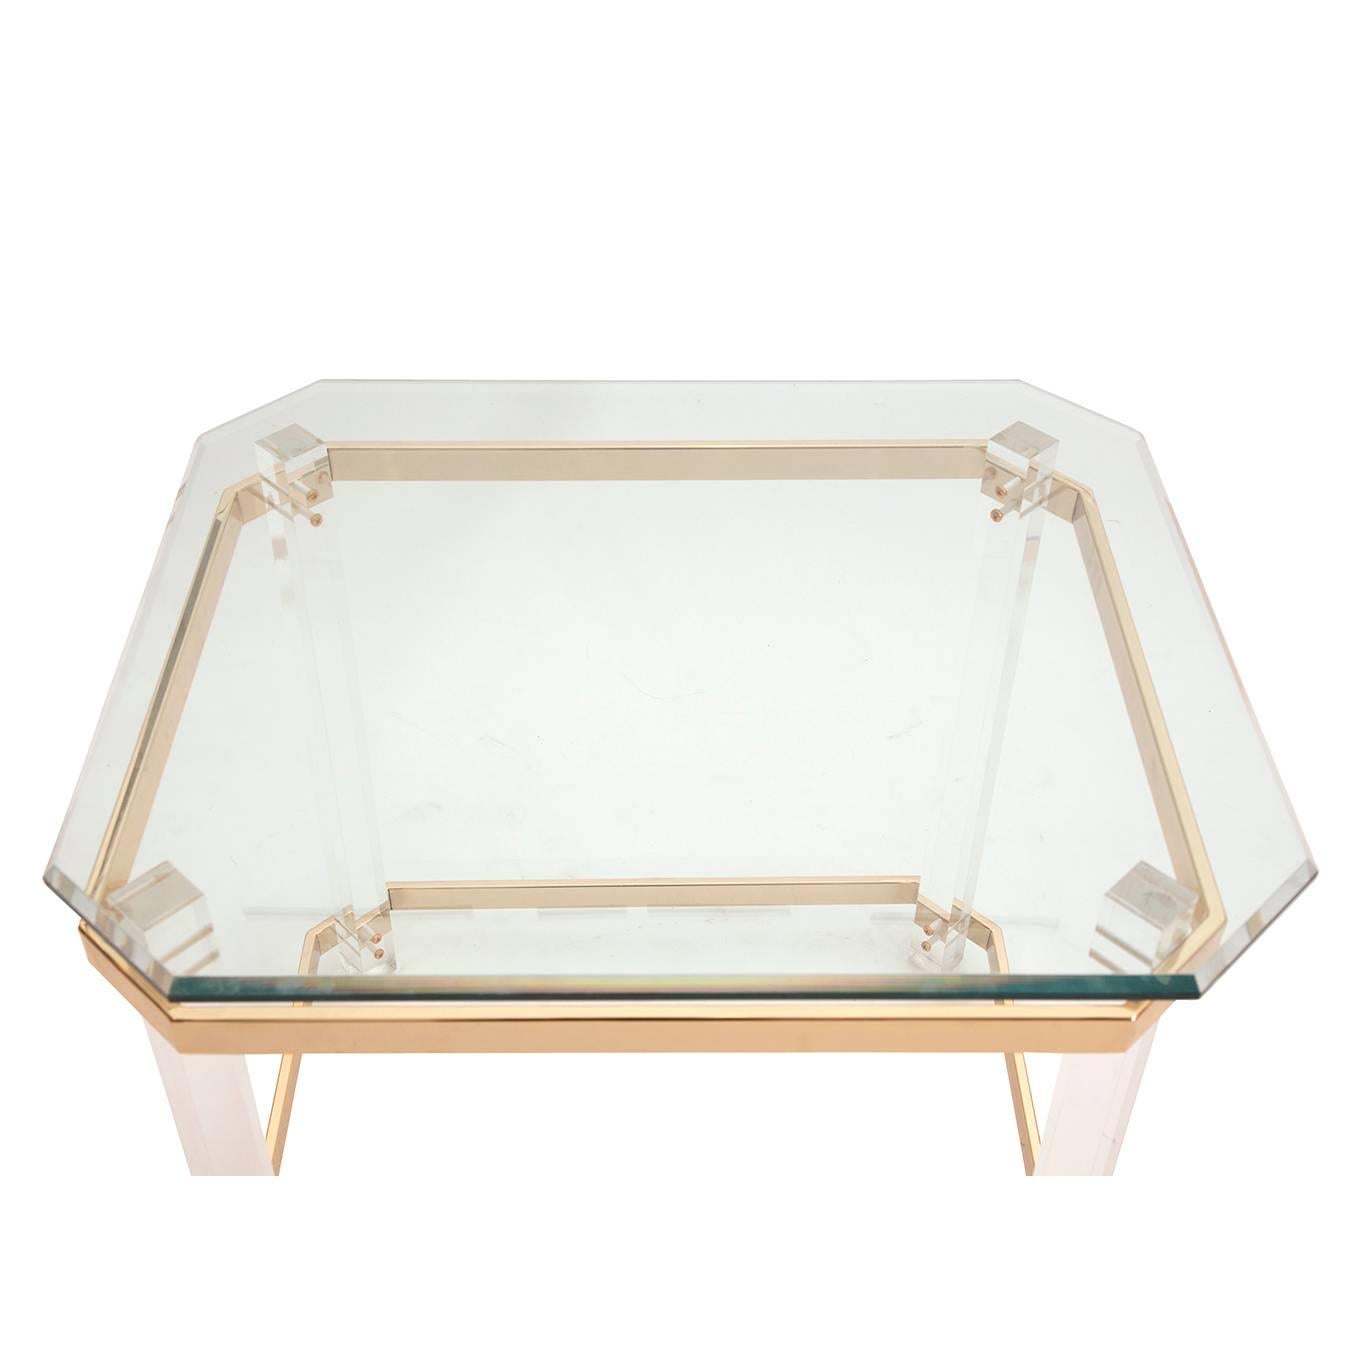 American Charles Hollis Jones Lucite, Brass and Glass Side Table, circa 1970s For Sale